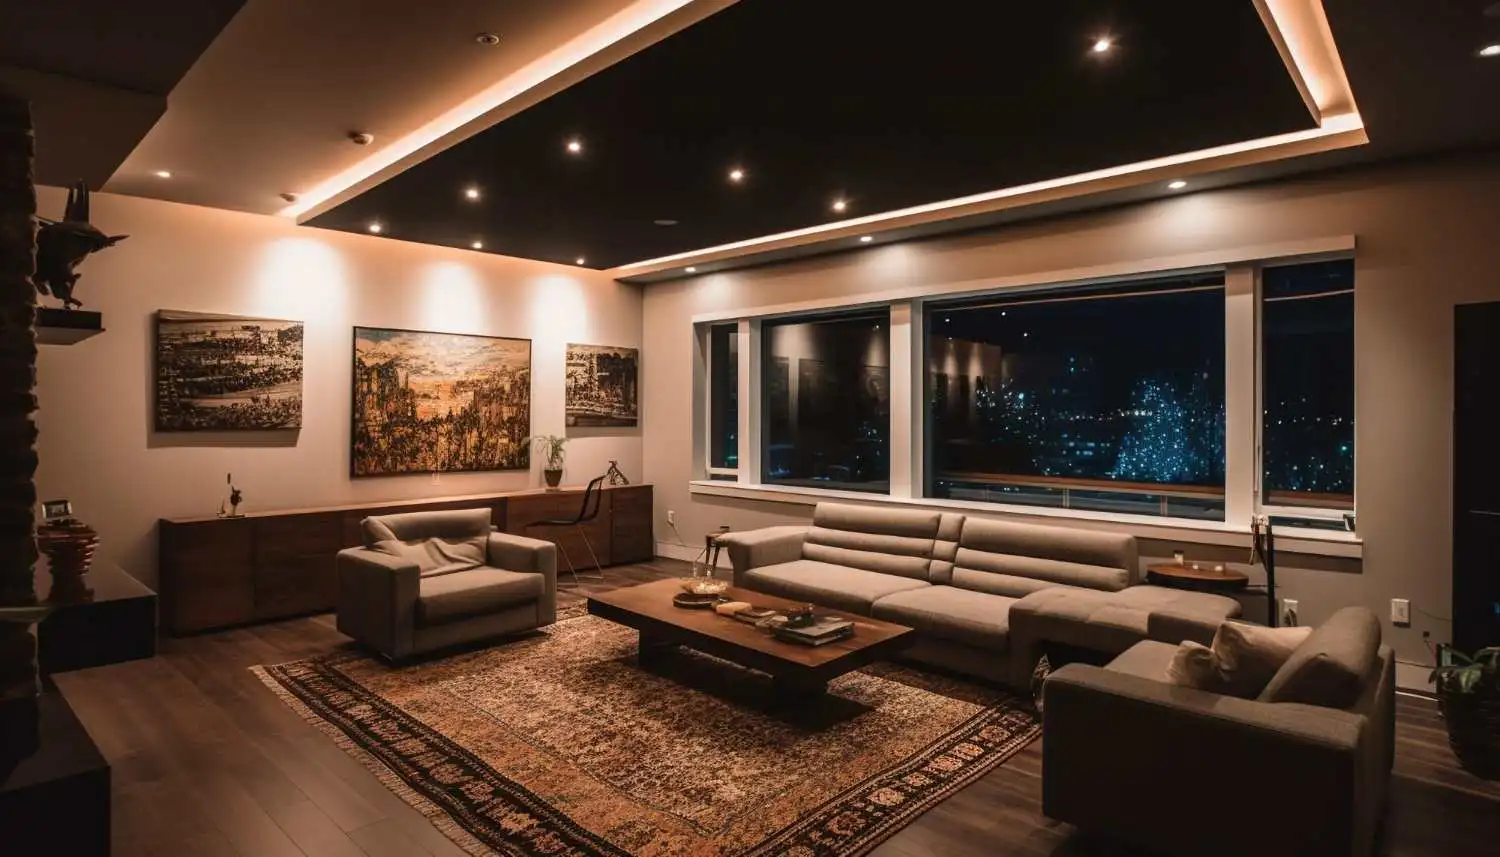 A modern living room with a large painting on the wall illuminated by LED lighting